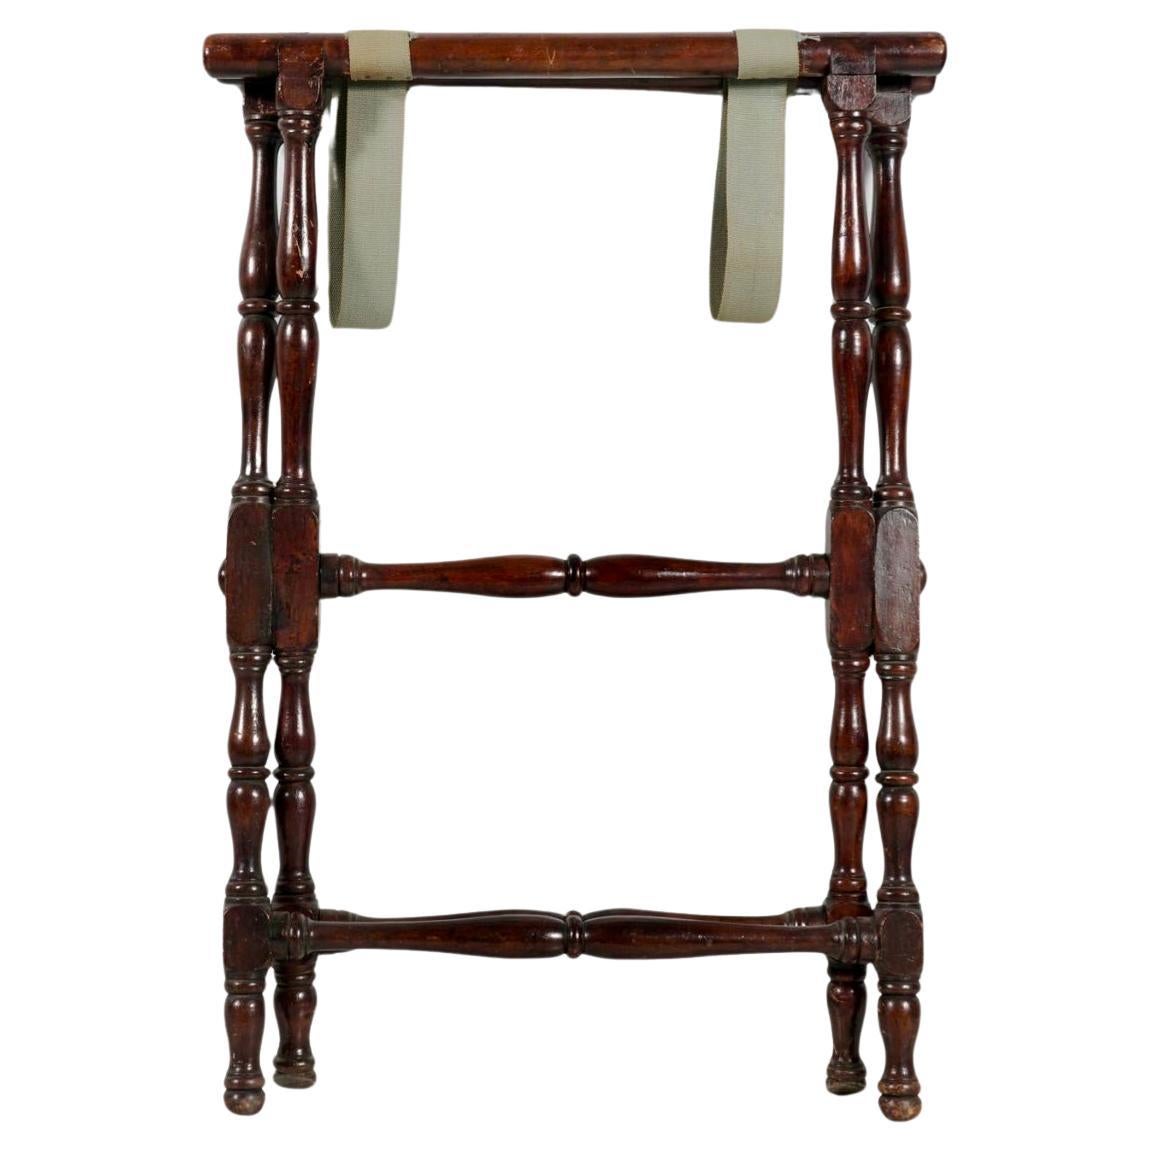 English Georgian Mahogany Butler's Tray and Folding Stand. Removable tray features open handles and dovetail corners. Tray has an elegant silhouette with curved outline, and rests on a folding stand. Stand has wonderfully shaped turned legs that can